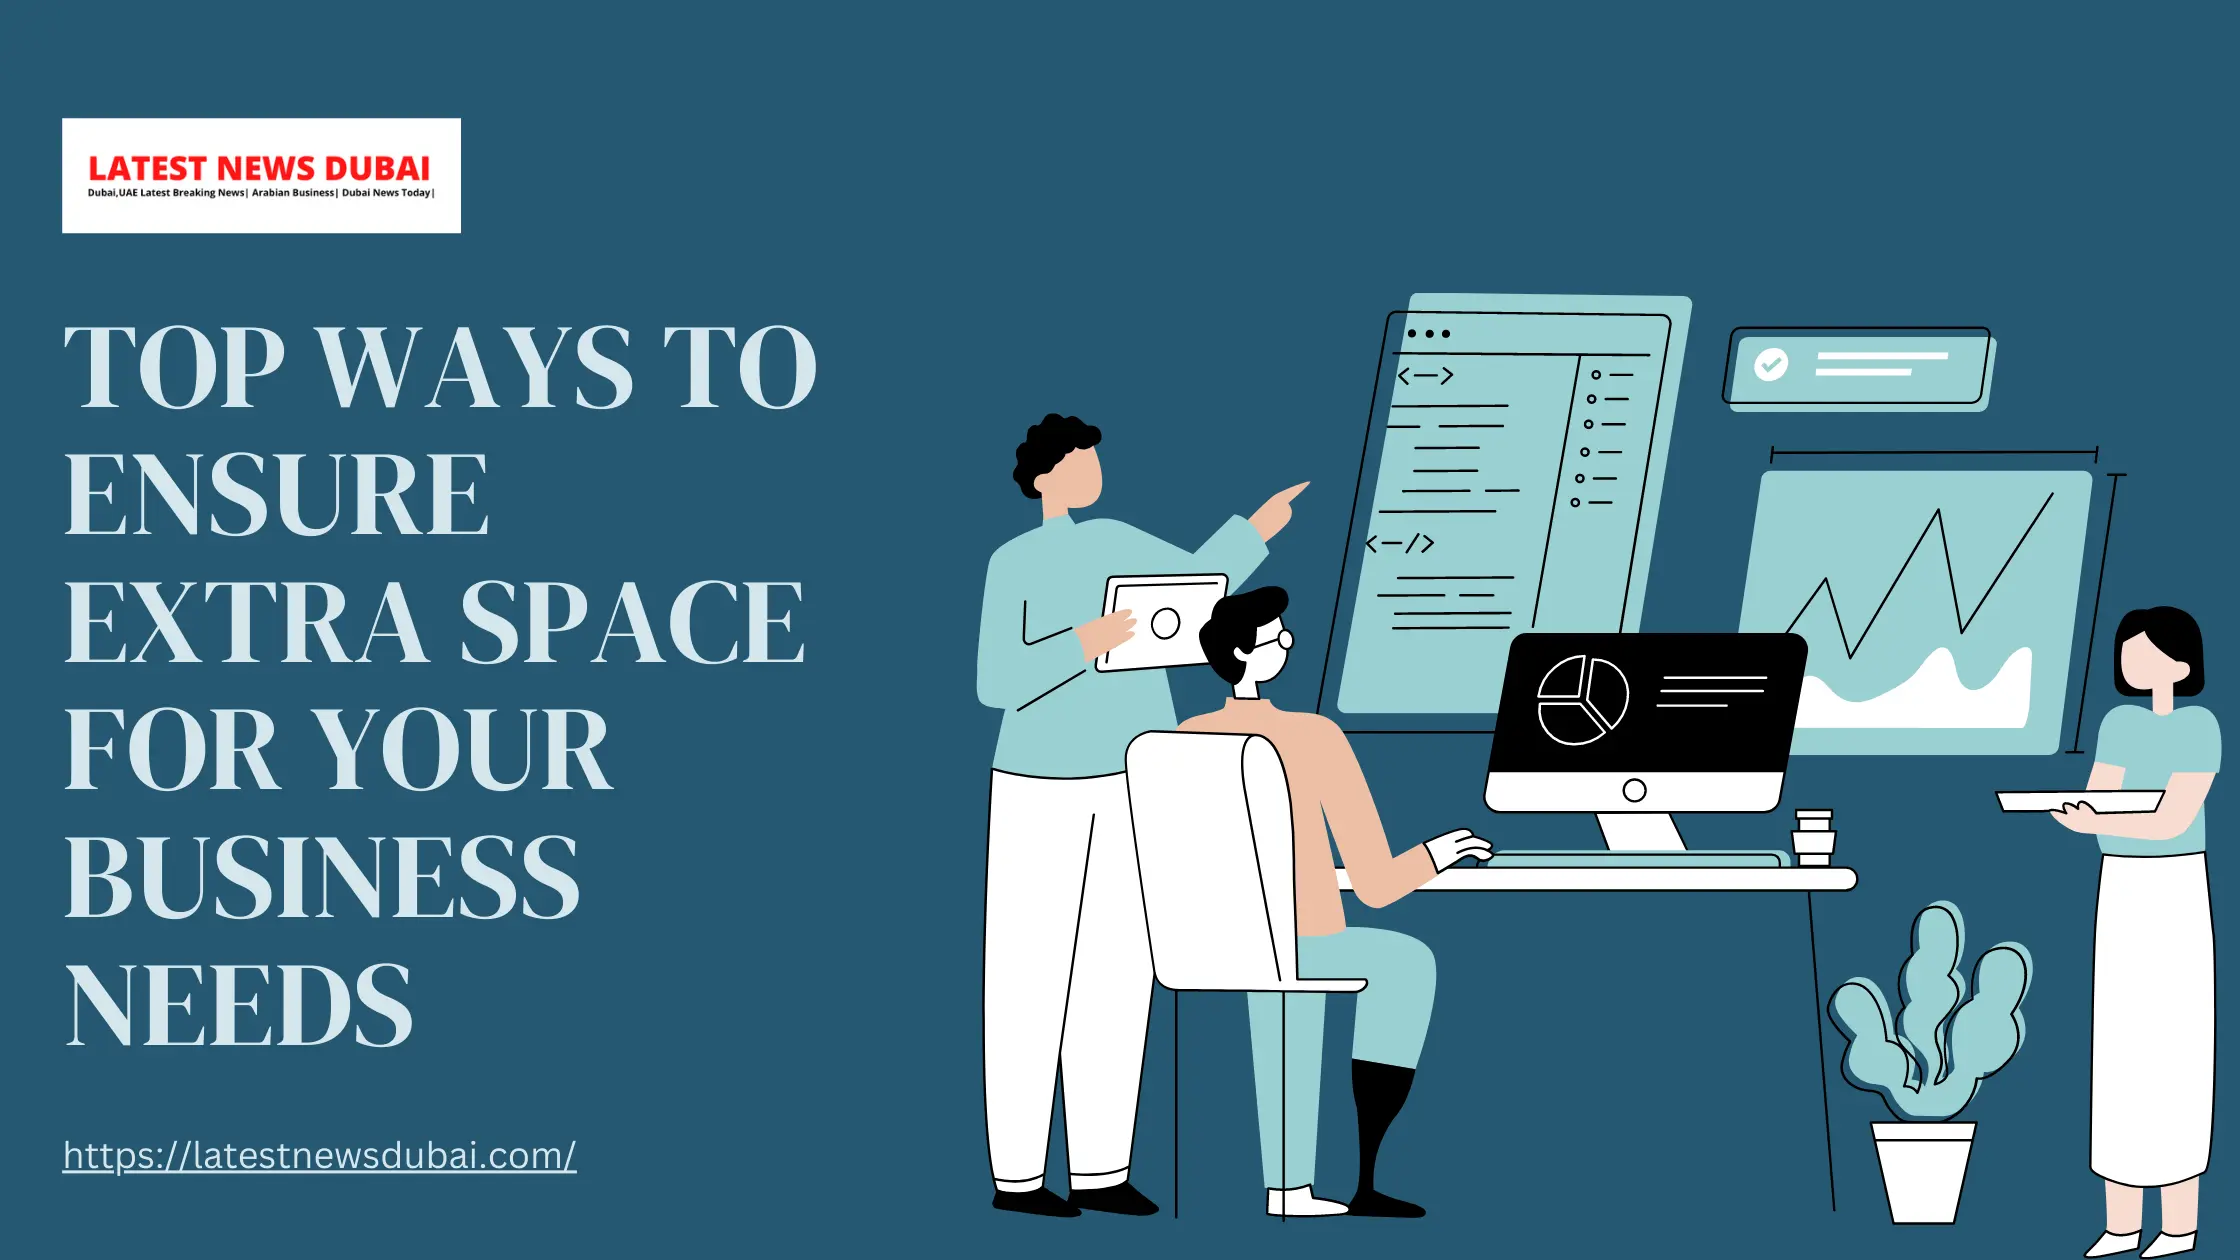 Top Ways to Ensure Extra Space for Your Business Needs